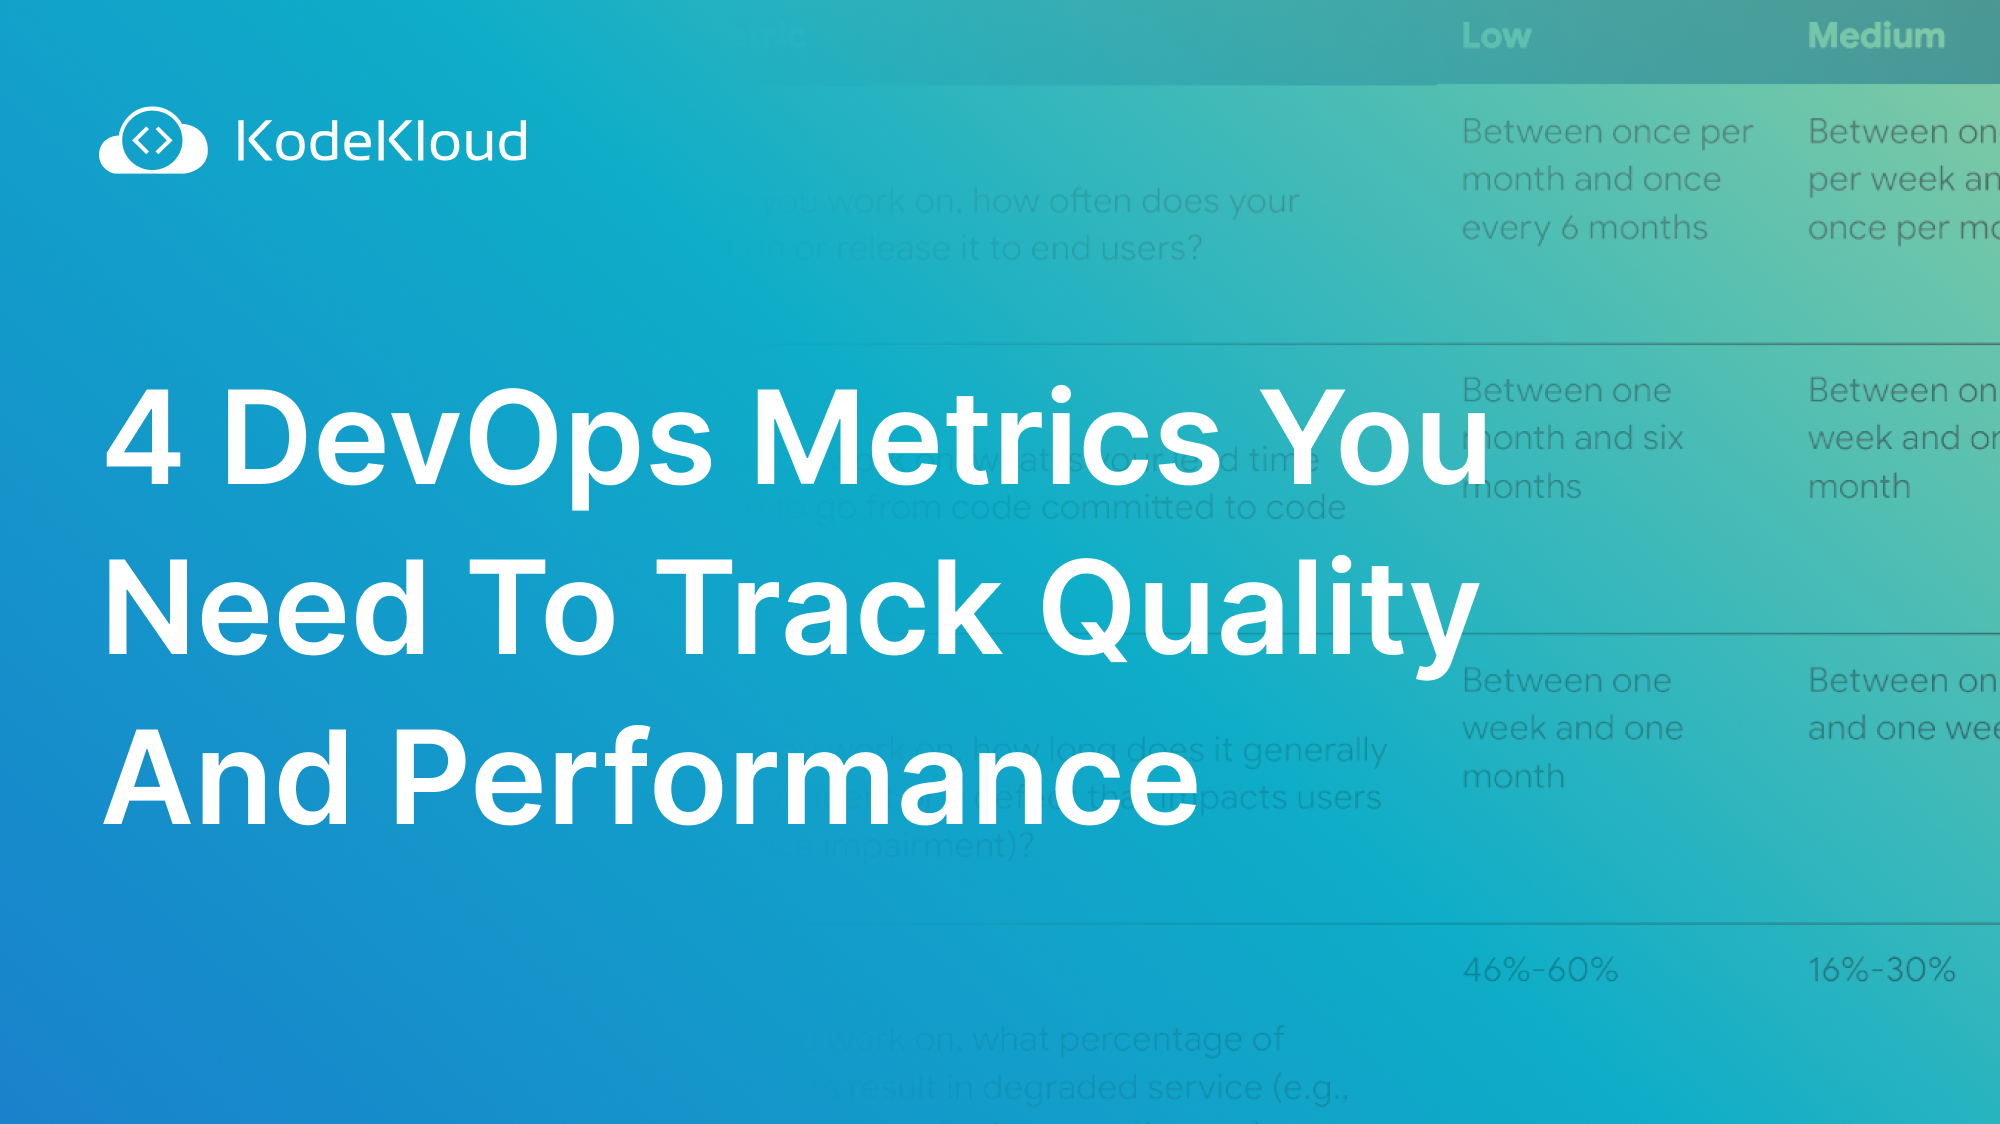 4 DevOps Metrics You Need To Track Quality And Performance